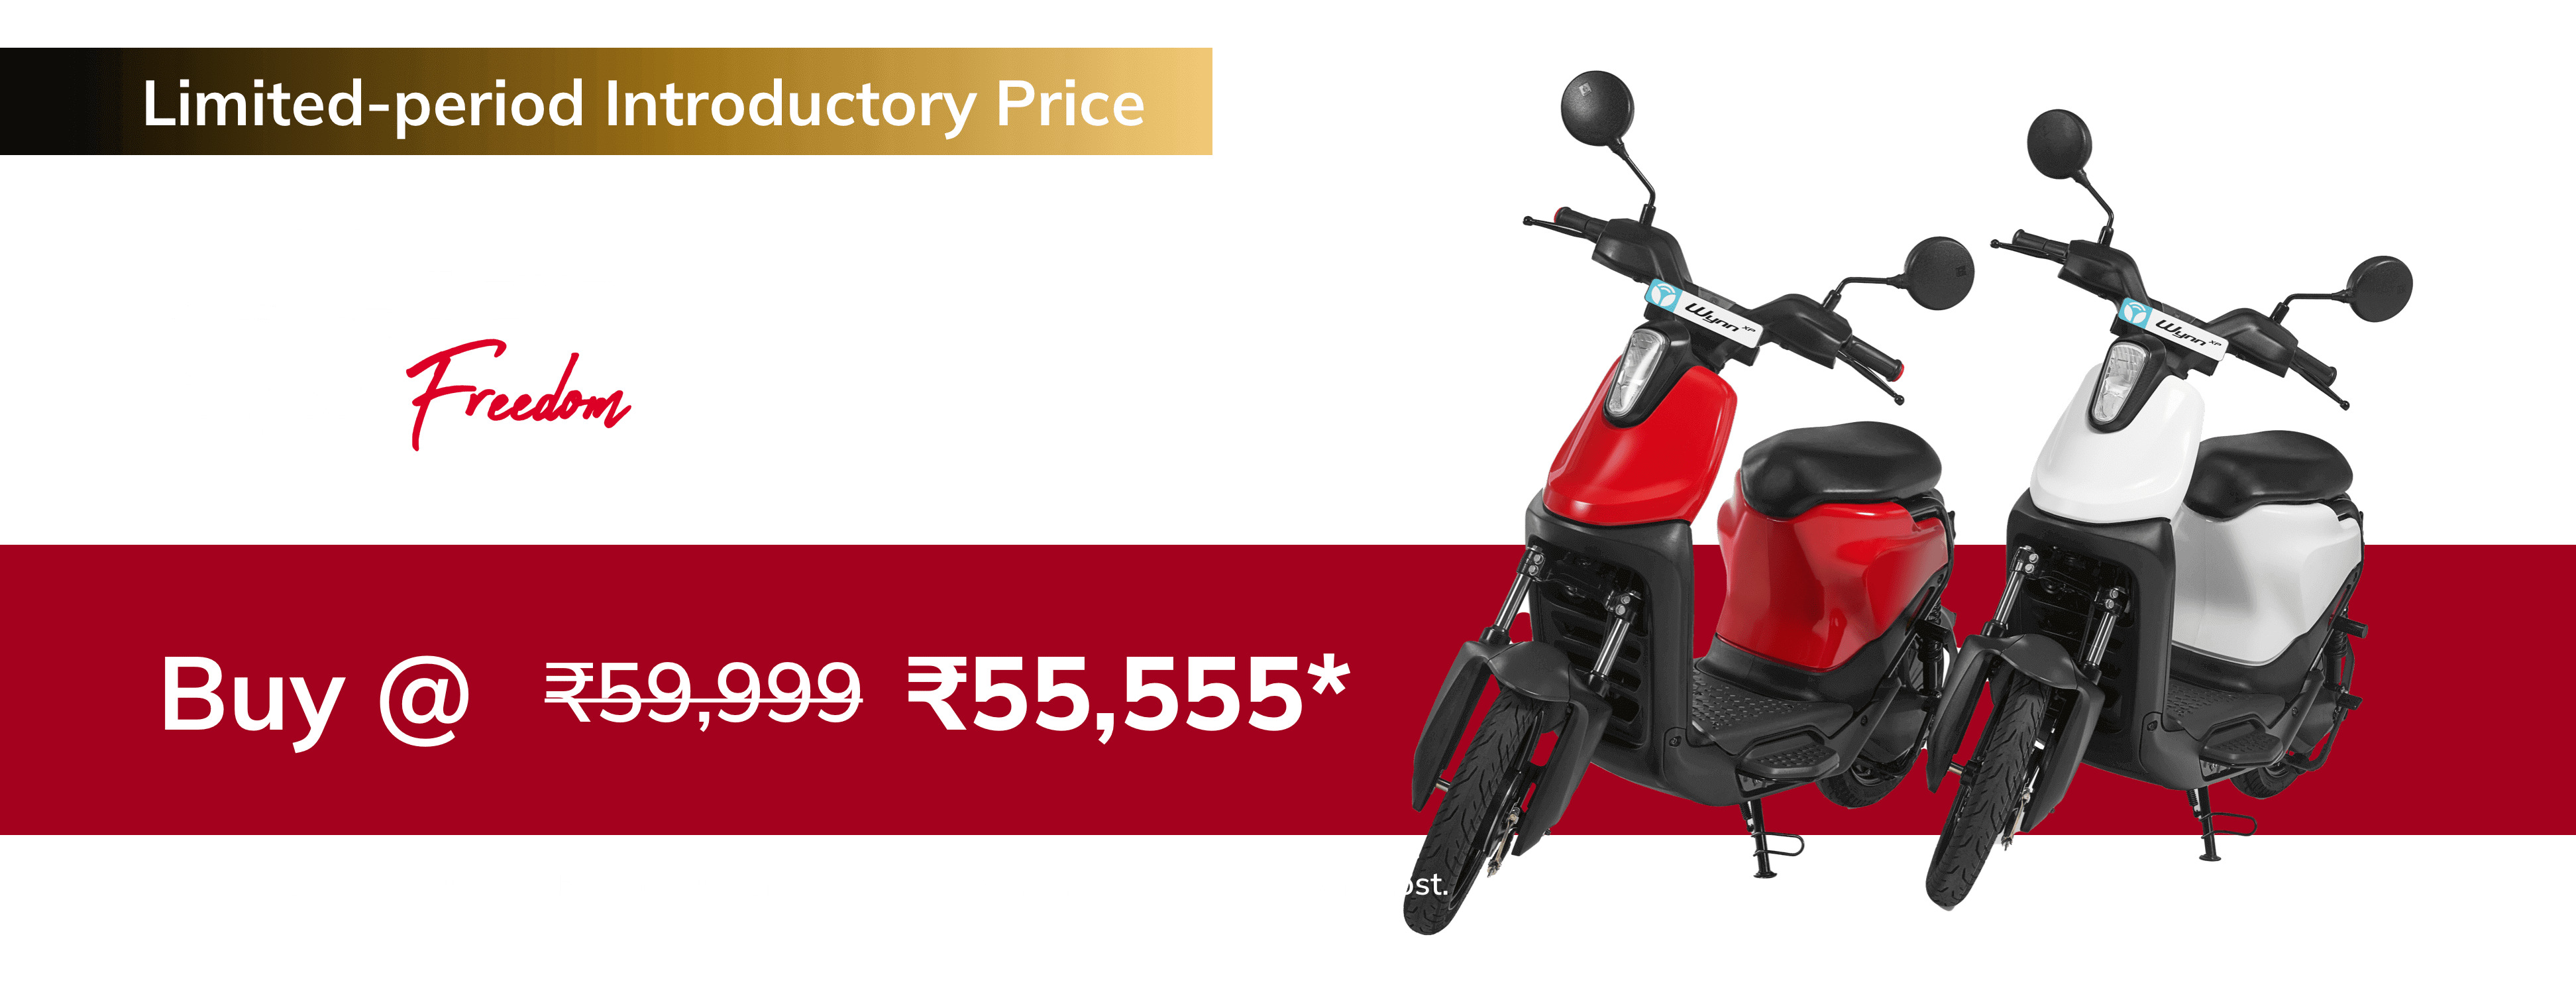 Bajaj YULU Wynn Electric Scooter Launched In India At Rs 55,555 - front